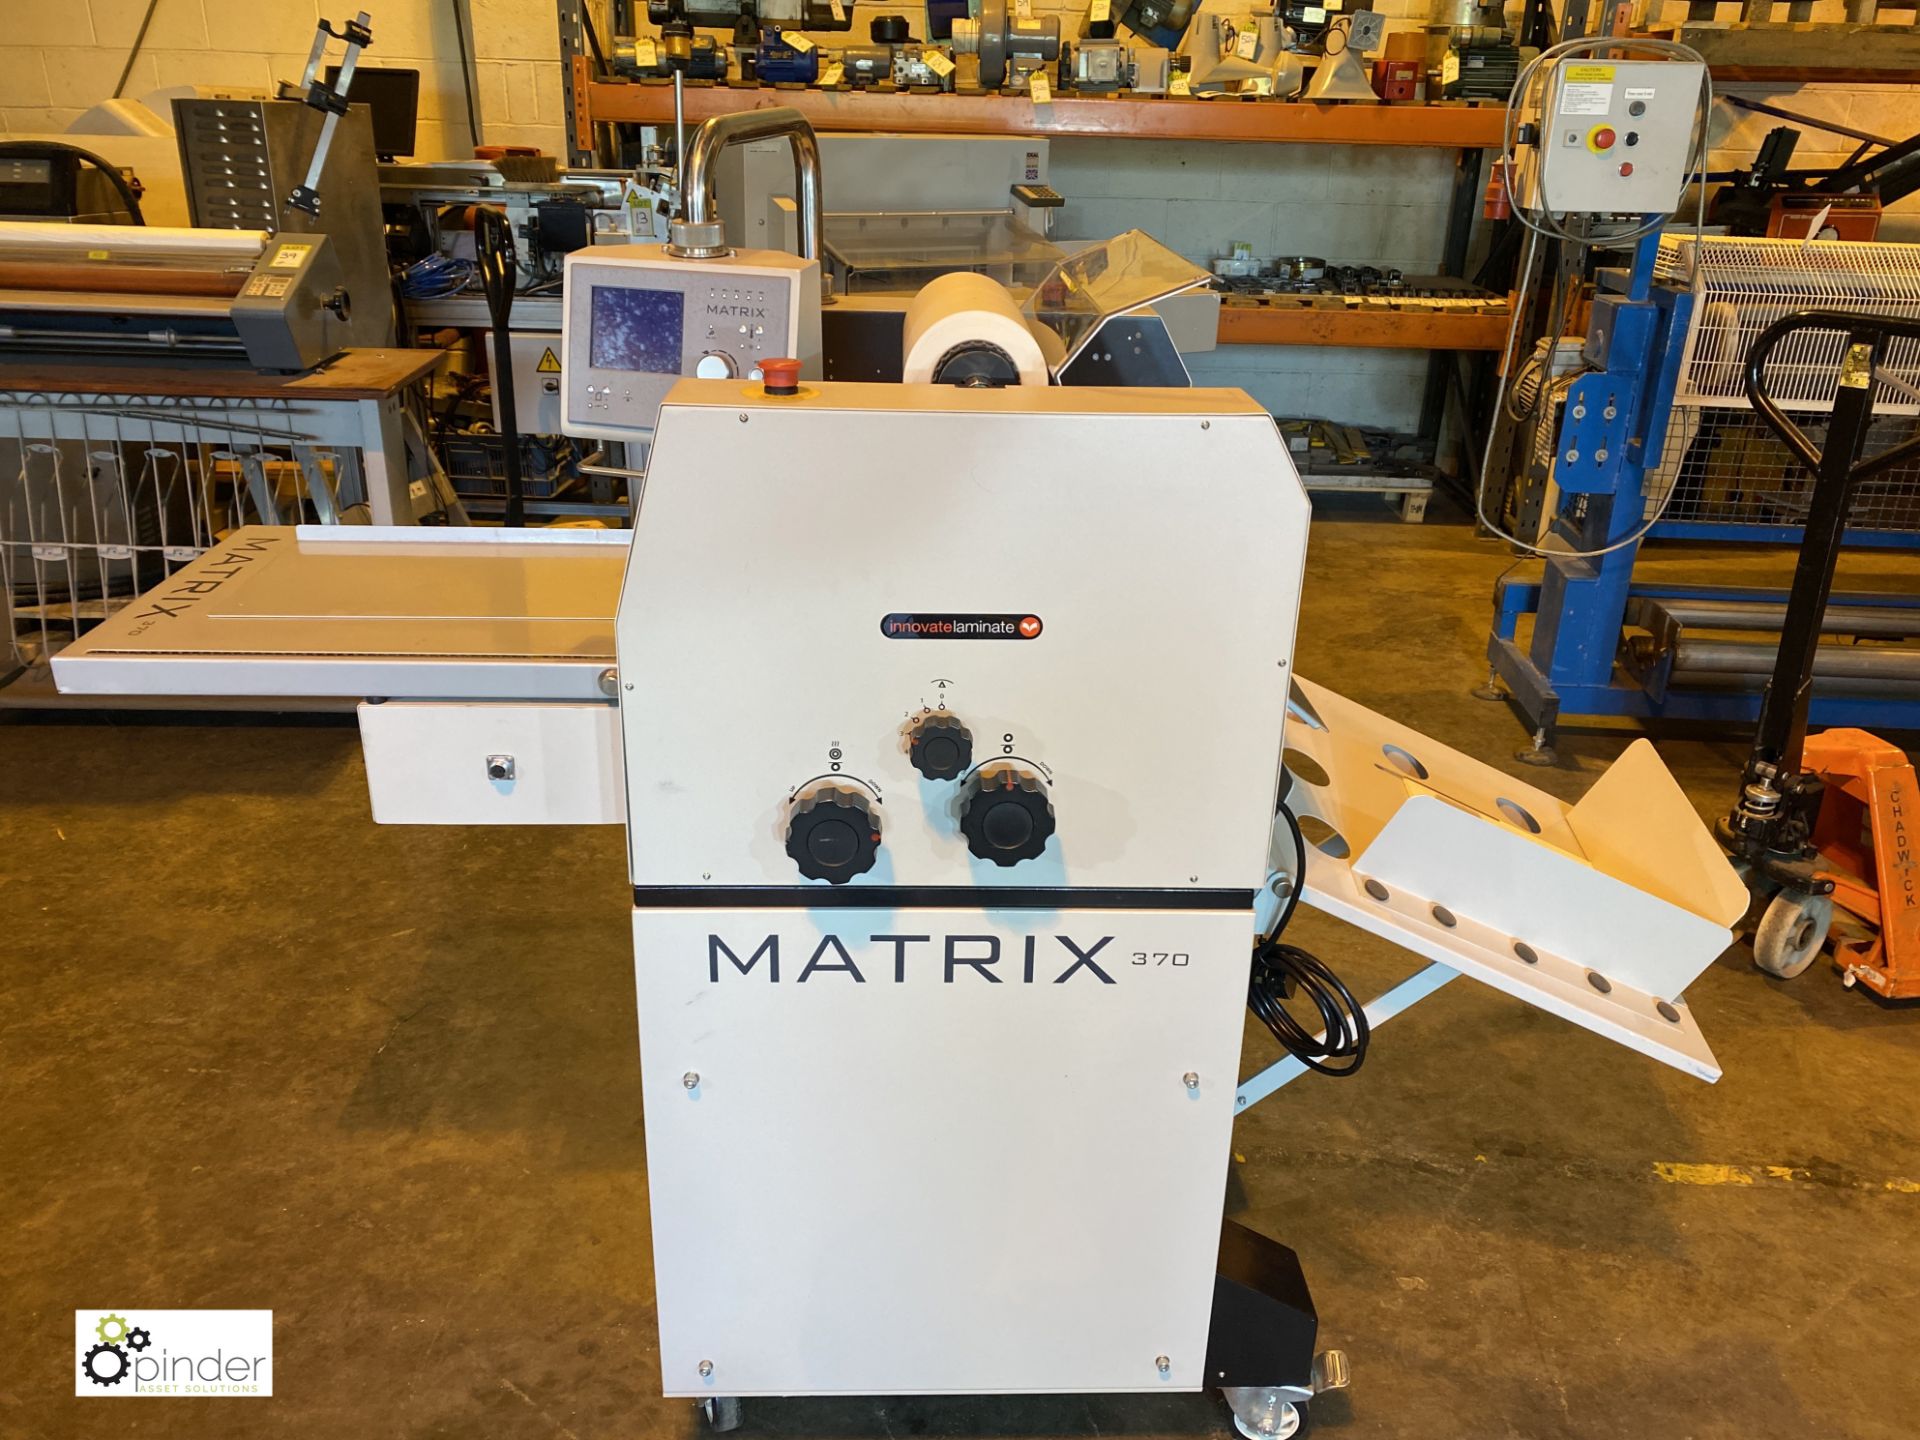 Matrix 370 Roll Laminator, 315mm width, 240volts, serial number 1112MX-370074, with 5 part rolls - Image 3 of 12